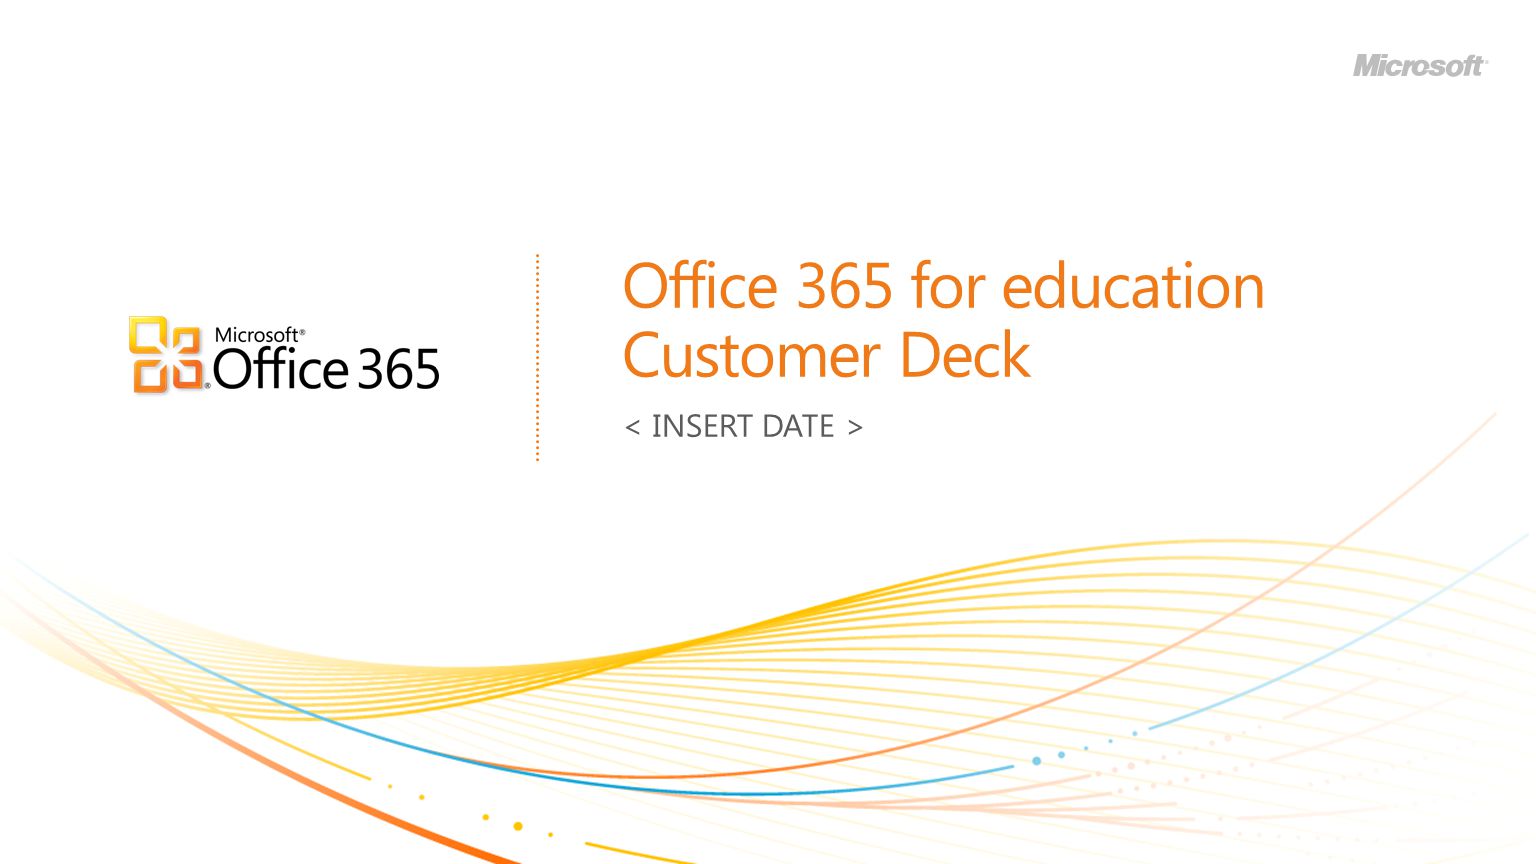 Office 365 for education Customer Deck